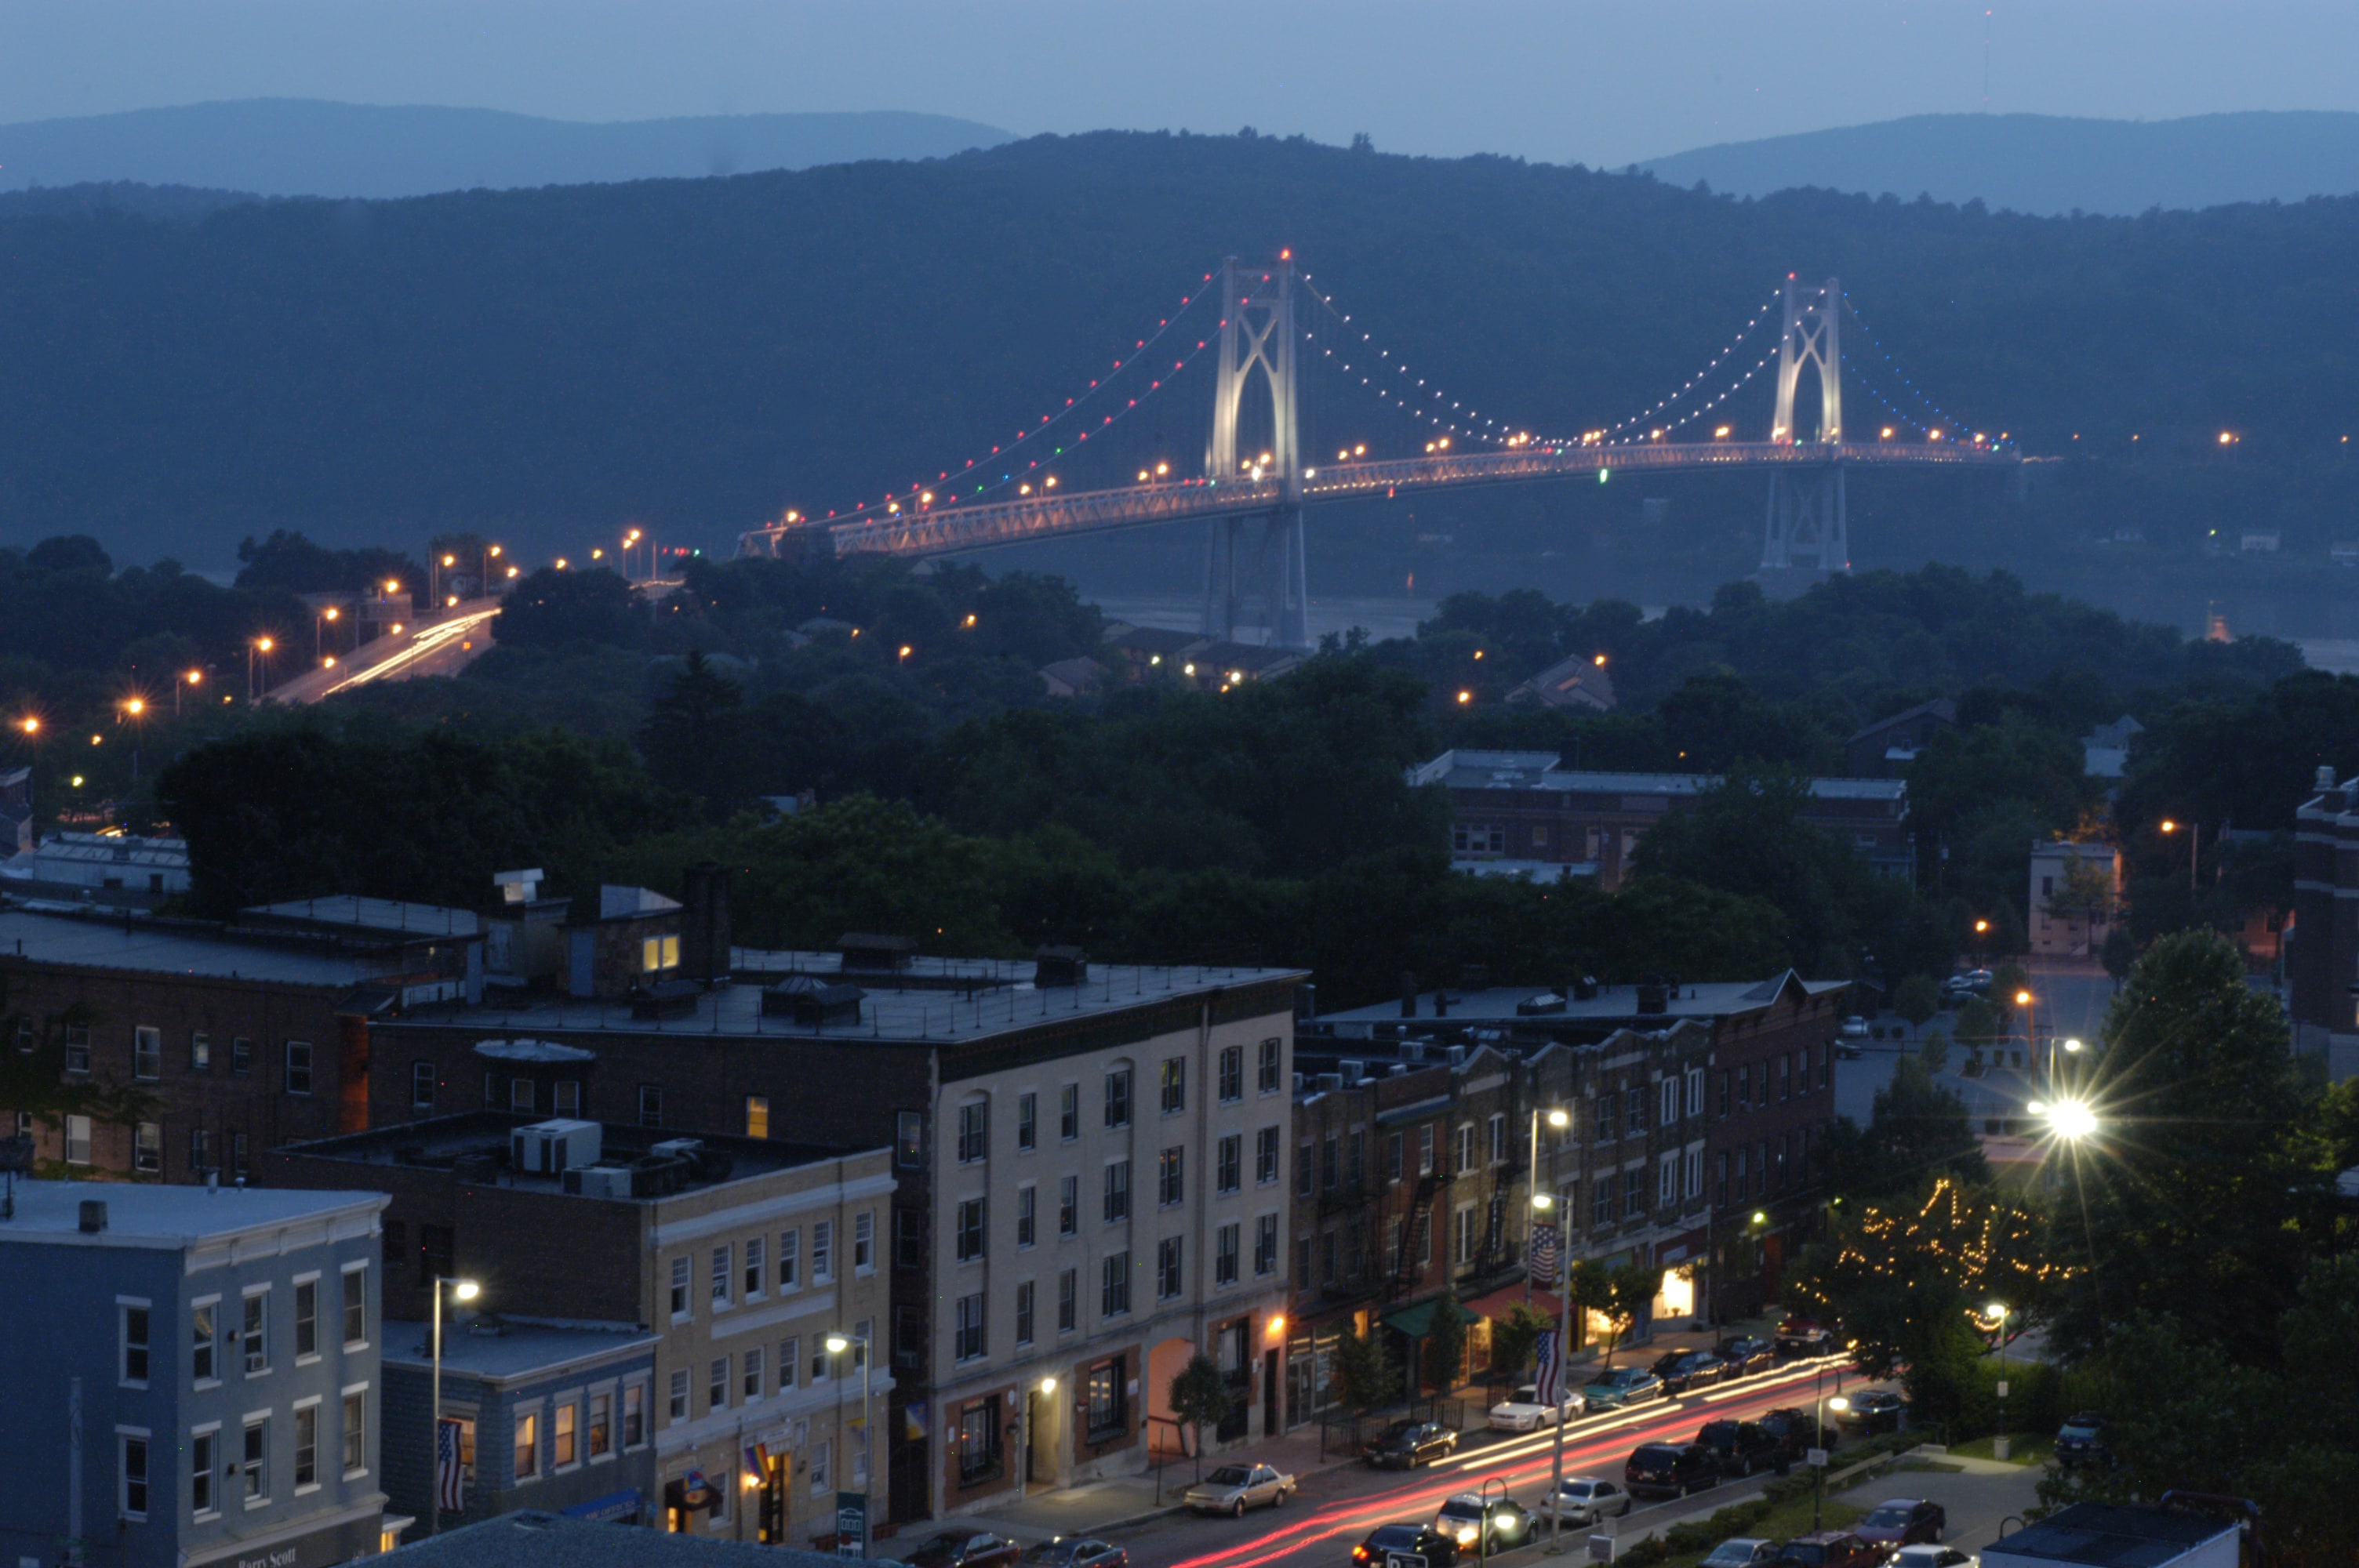 Downtown Poughkeepsie in early evening, with the Mid-Hudson Bridge illuminated in the background